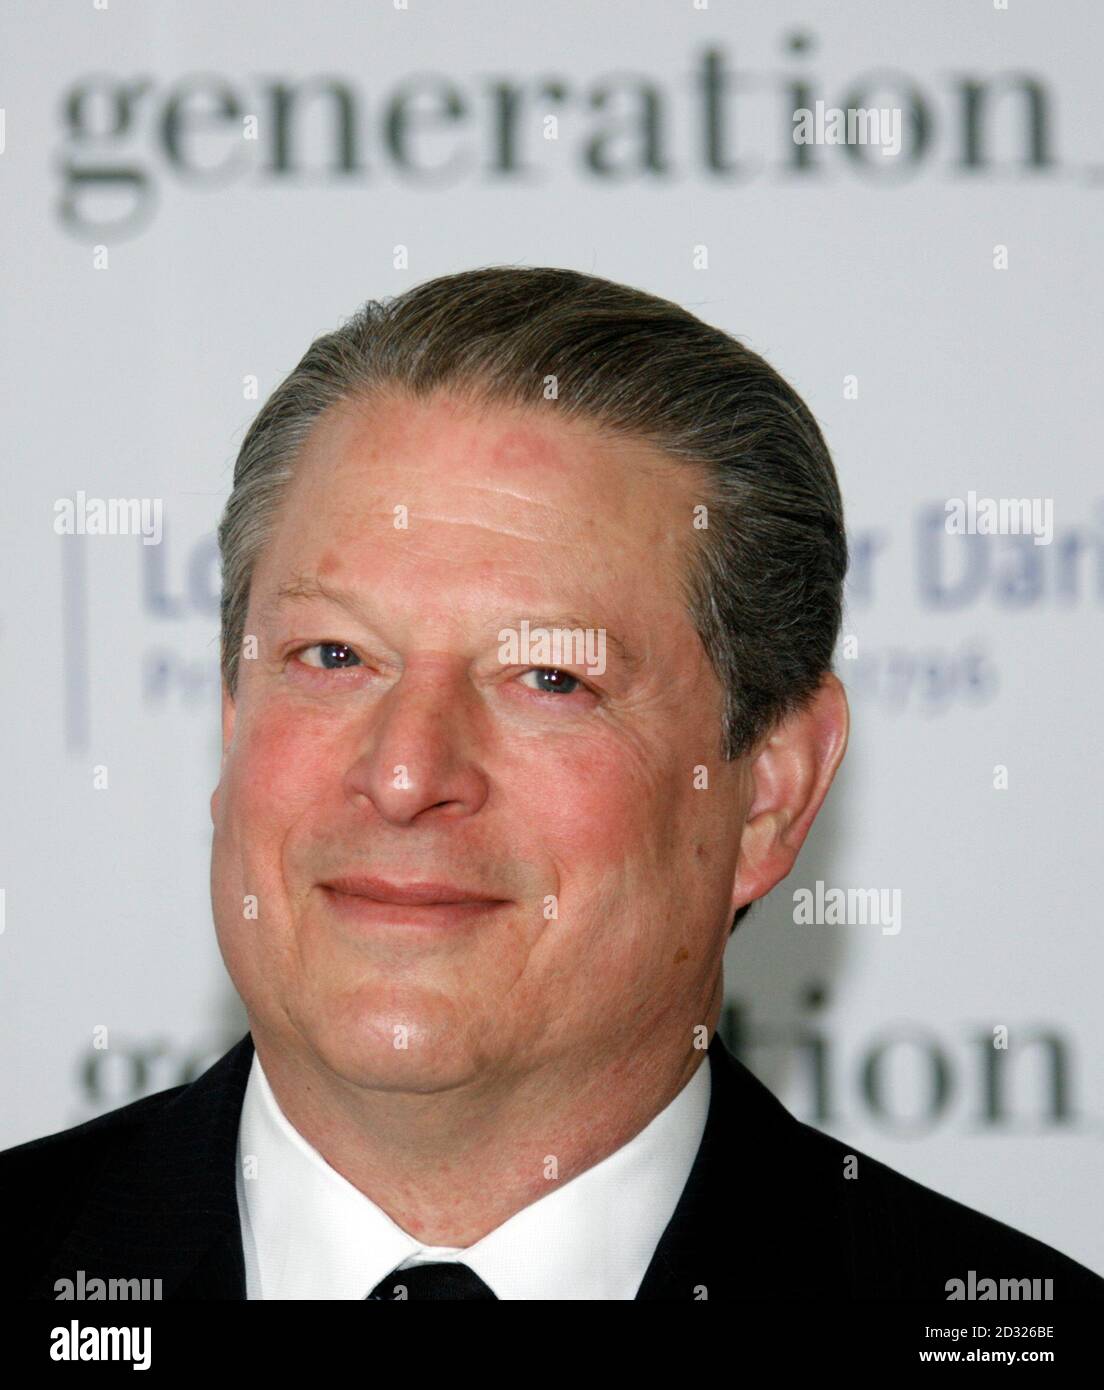 Al Gore, Nobel Peace Prize winner and Chairman of Generation Investment Management attends a news conference with Lombard Odier Darier Hentsch (LODH) Private Bank at Cointrin airport in Geneva March 11, 2008. LODH and Generation Investment Management have decided to join forces to promote sustainable investment. REUTERS/Denis Balibouse   (SWITZERLAND) Stock Photo